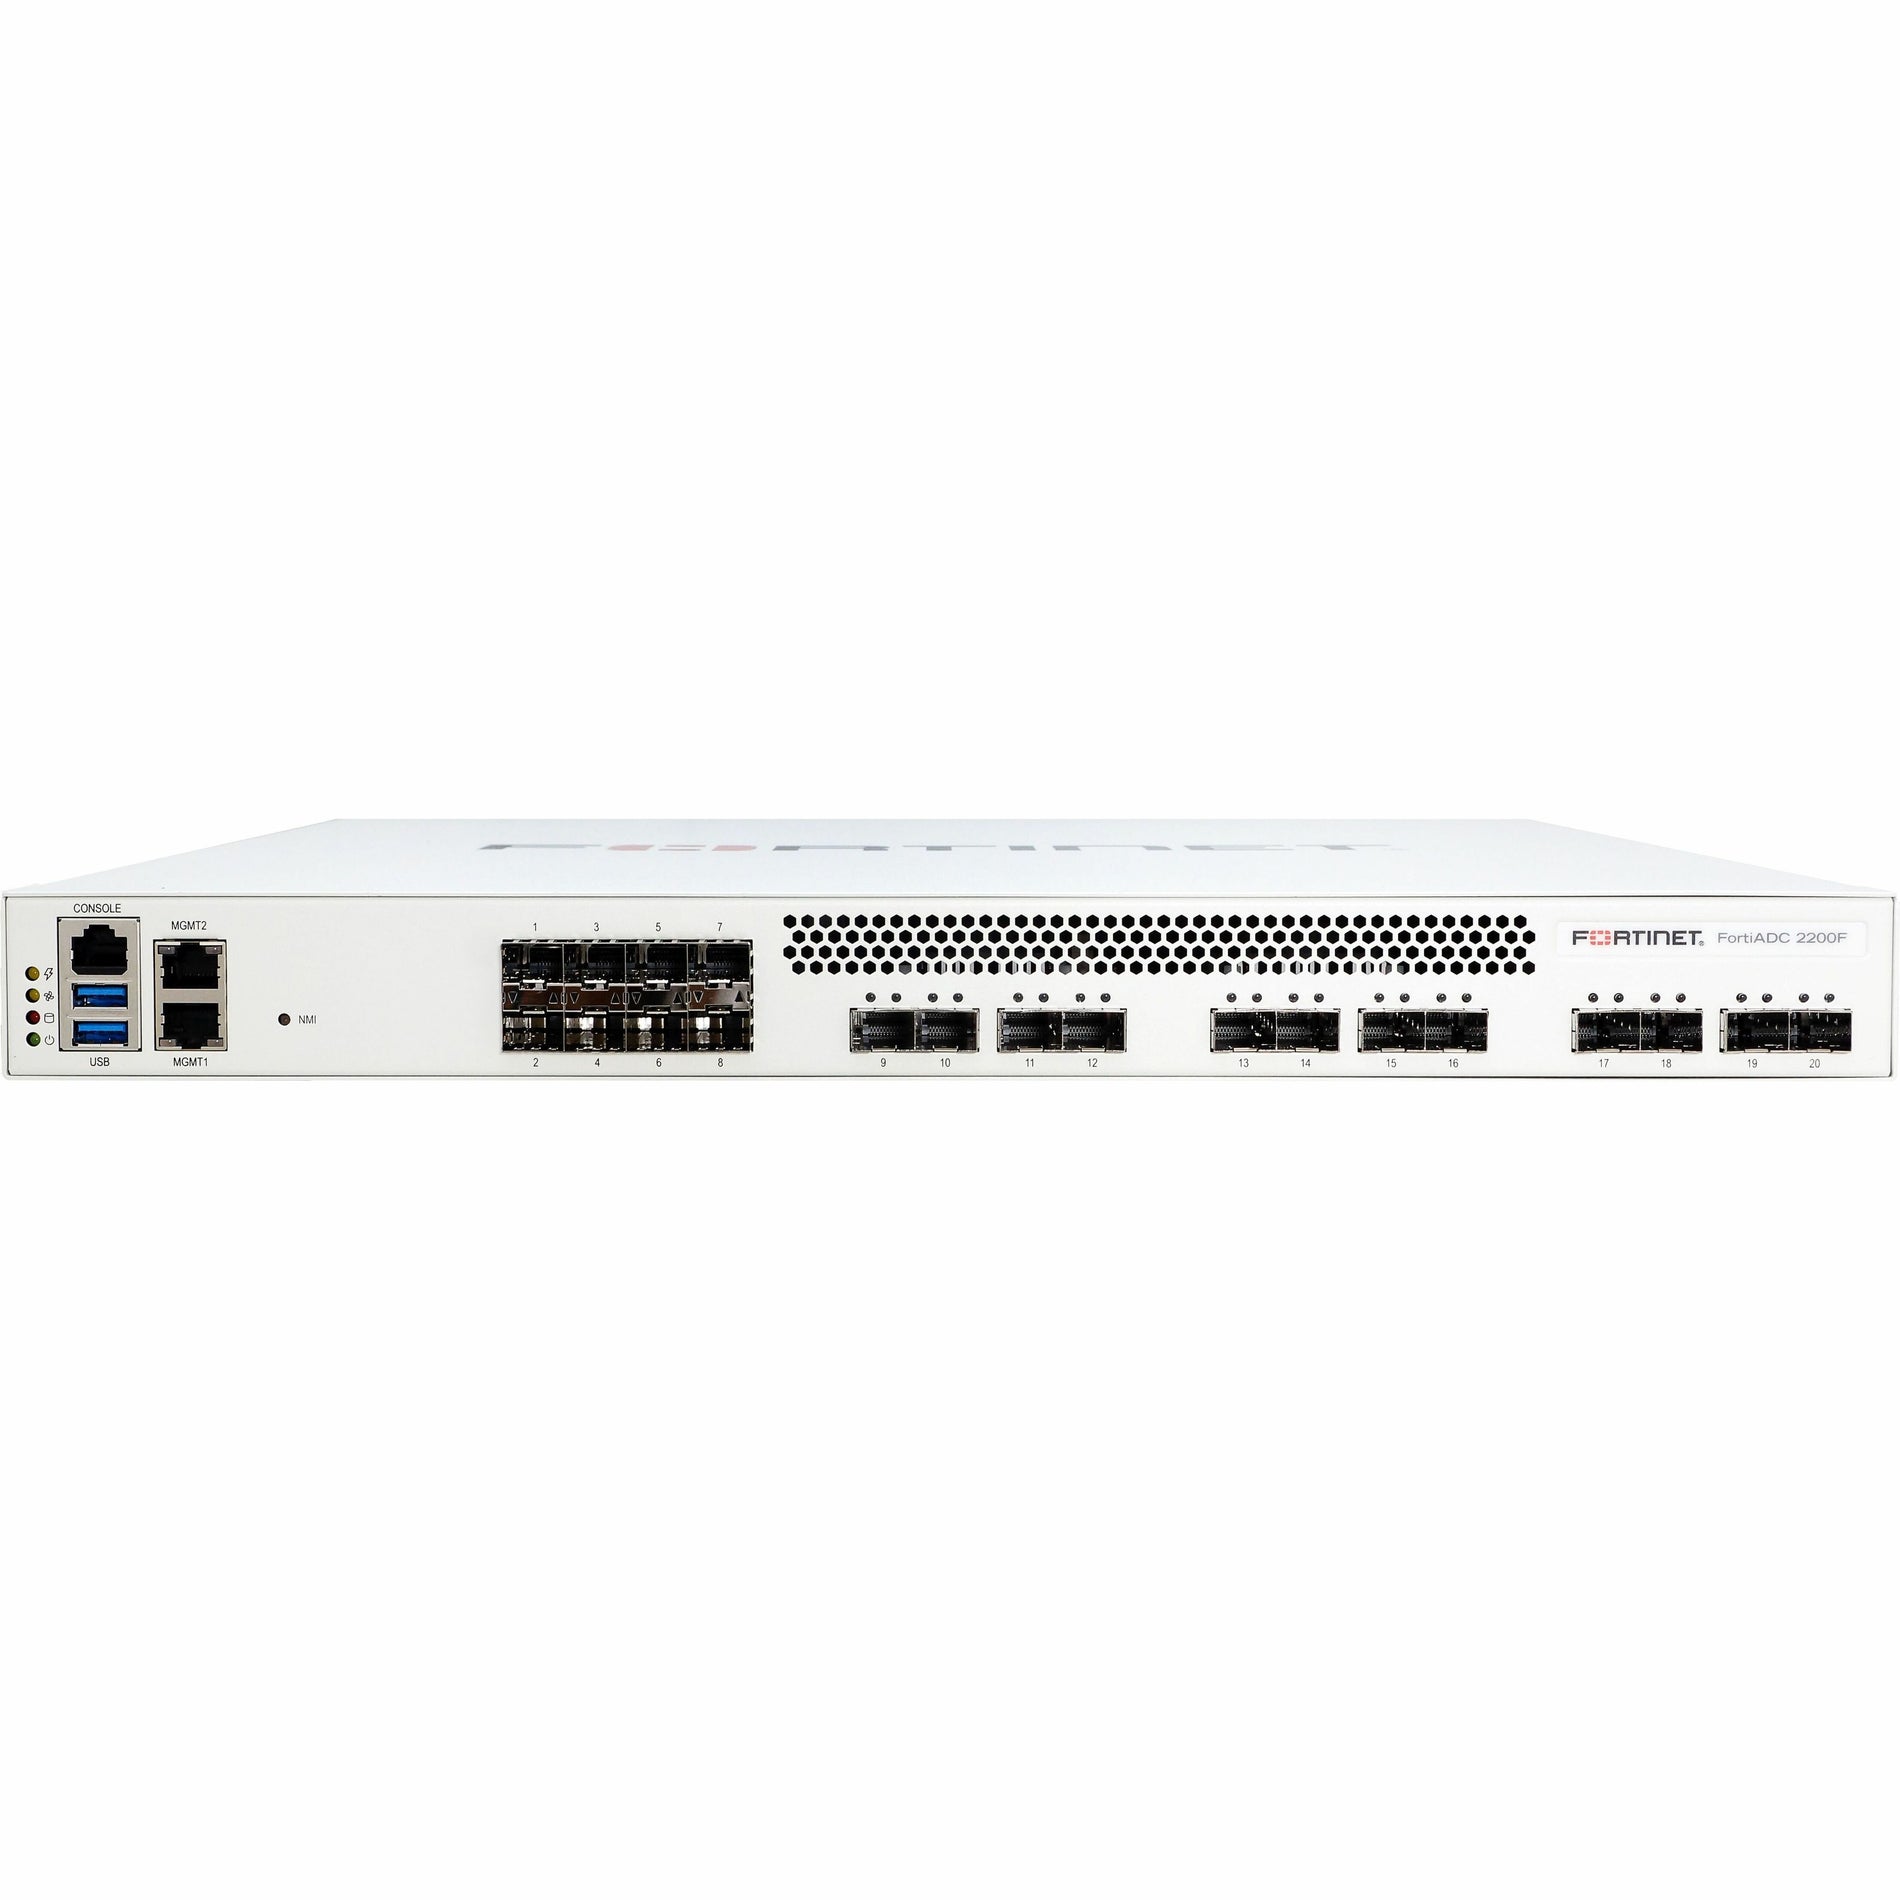 Fortinet FAD-2200F FortiADC Network Security Appliance, Application Security, DDoS Protection, SSL Offloading, Antivirus, and More